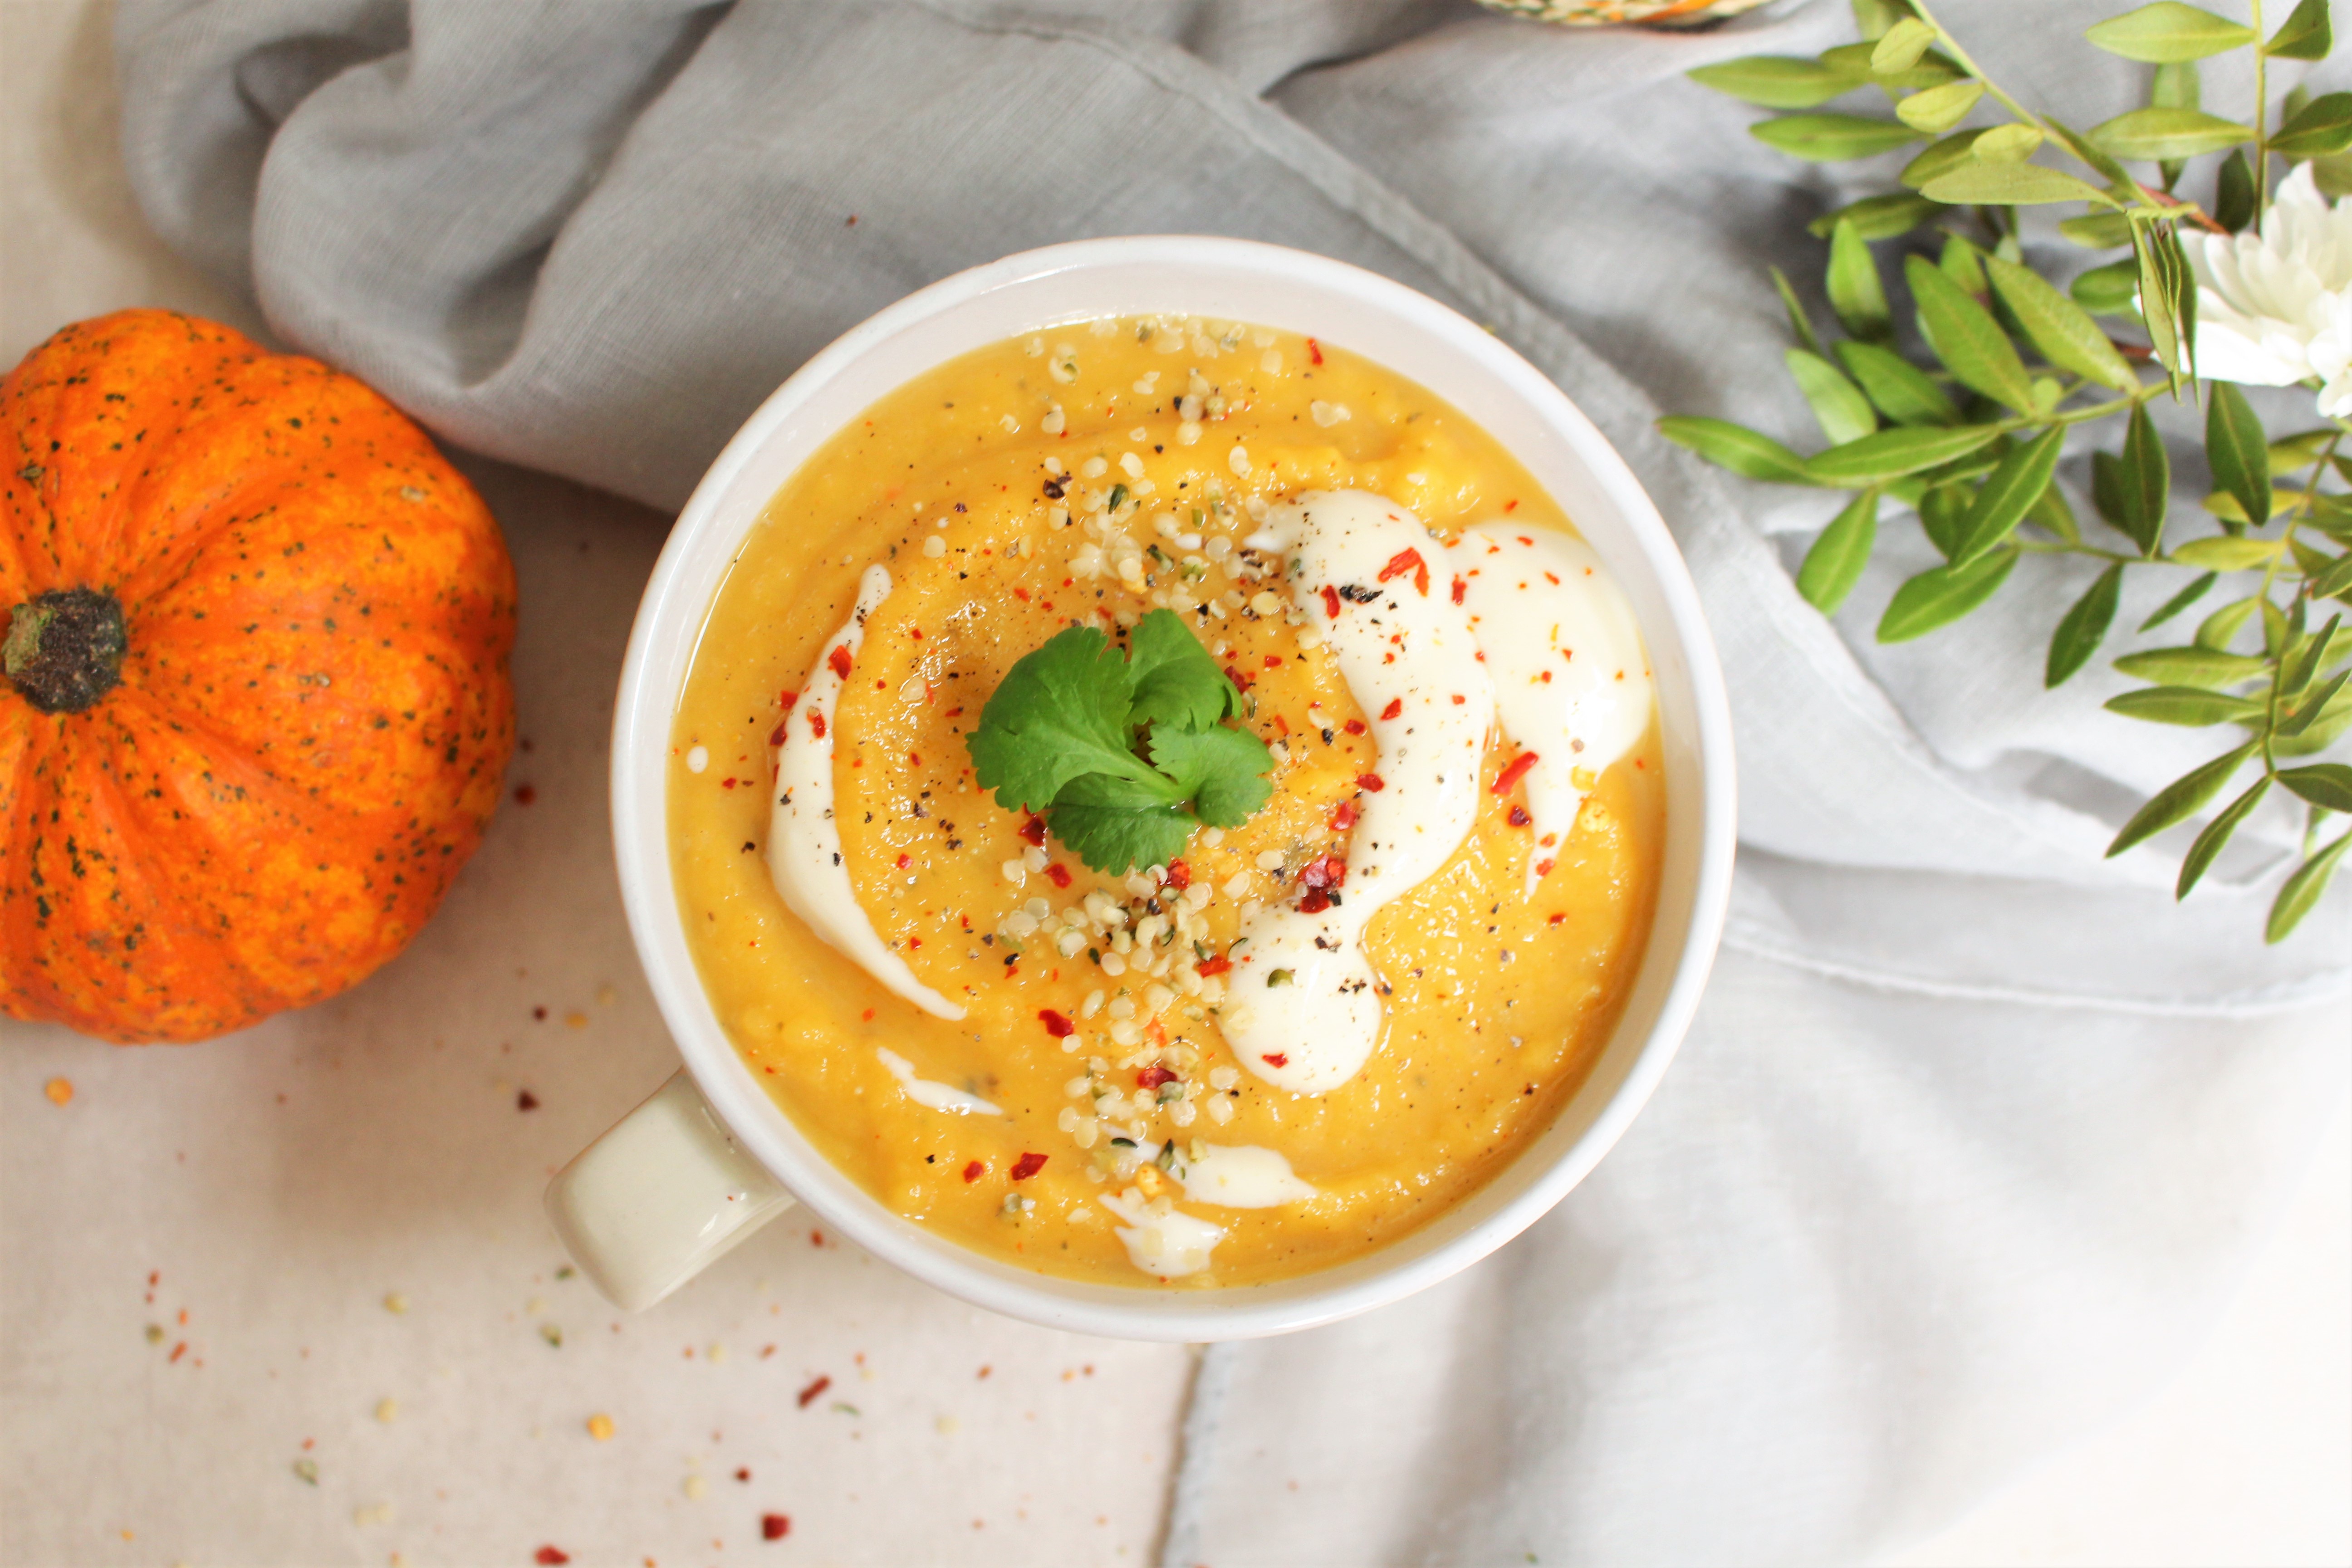 Rosemary Roasted Butternut Squash and Hemp Soup